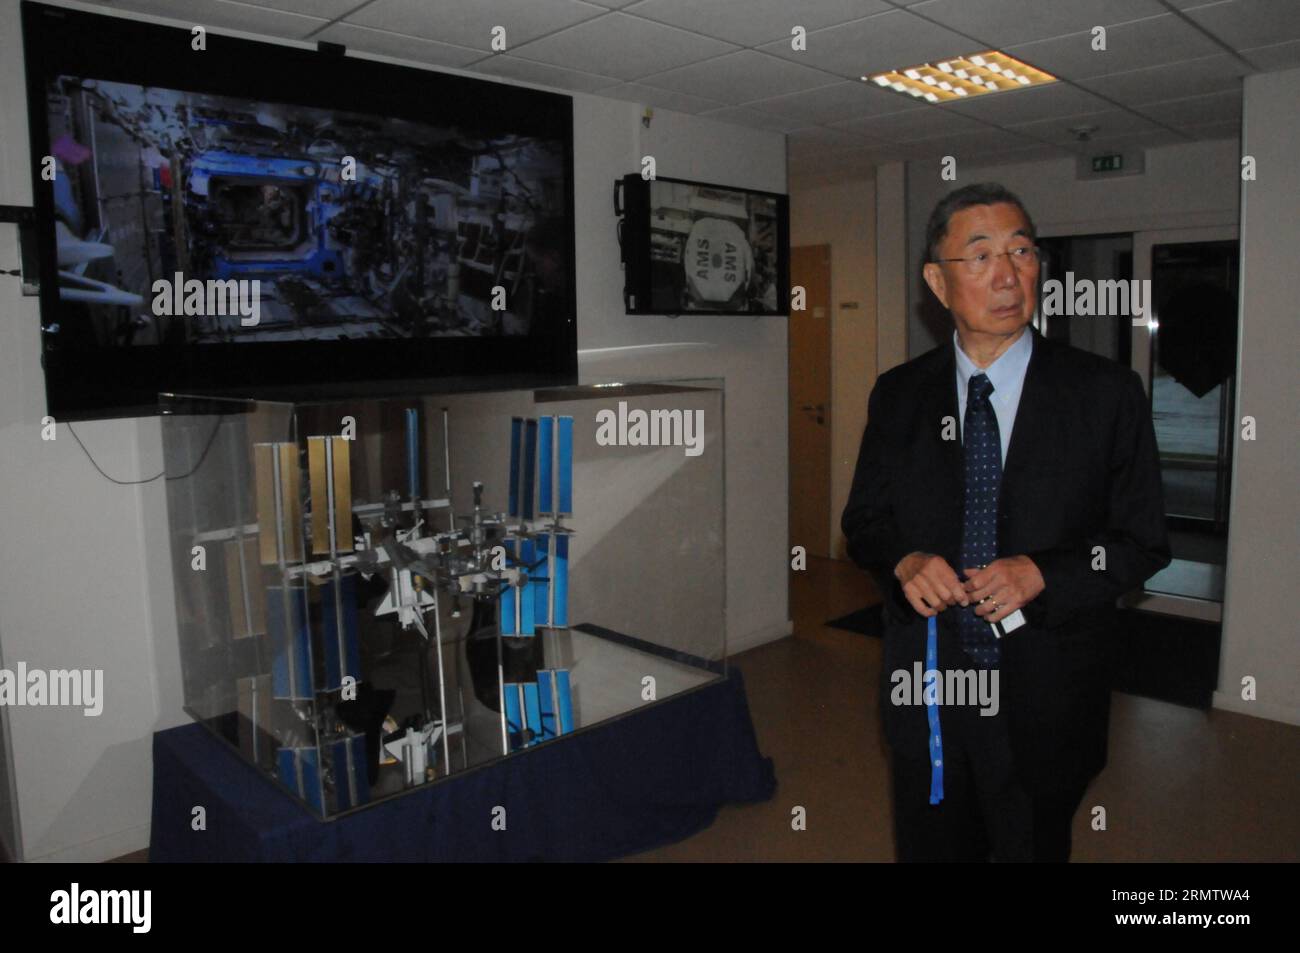 (140920) -- GENEVA, Sept. 18, 2014 -- Nobel laureate Samuel Ting stands in front of the monitor of the International Space Station (ISS) in the laboratory in Geneva, Switzerland, Sept. 18, 2014. The Alpha Magnetic Spectrometer (AMS) team led by Ting announced on Thursday new results in the search for dark matter, shedding more light on the dark matter existence. Cosmic rays are charged high-energy particles that permeate space. The AMS, a particle physics detector installed on the ISS, is designed to study them before they have a chance to interact with the Earth s atmosphere. ) (zjy) SWITZERL Stock Photo